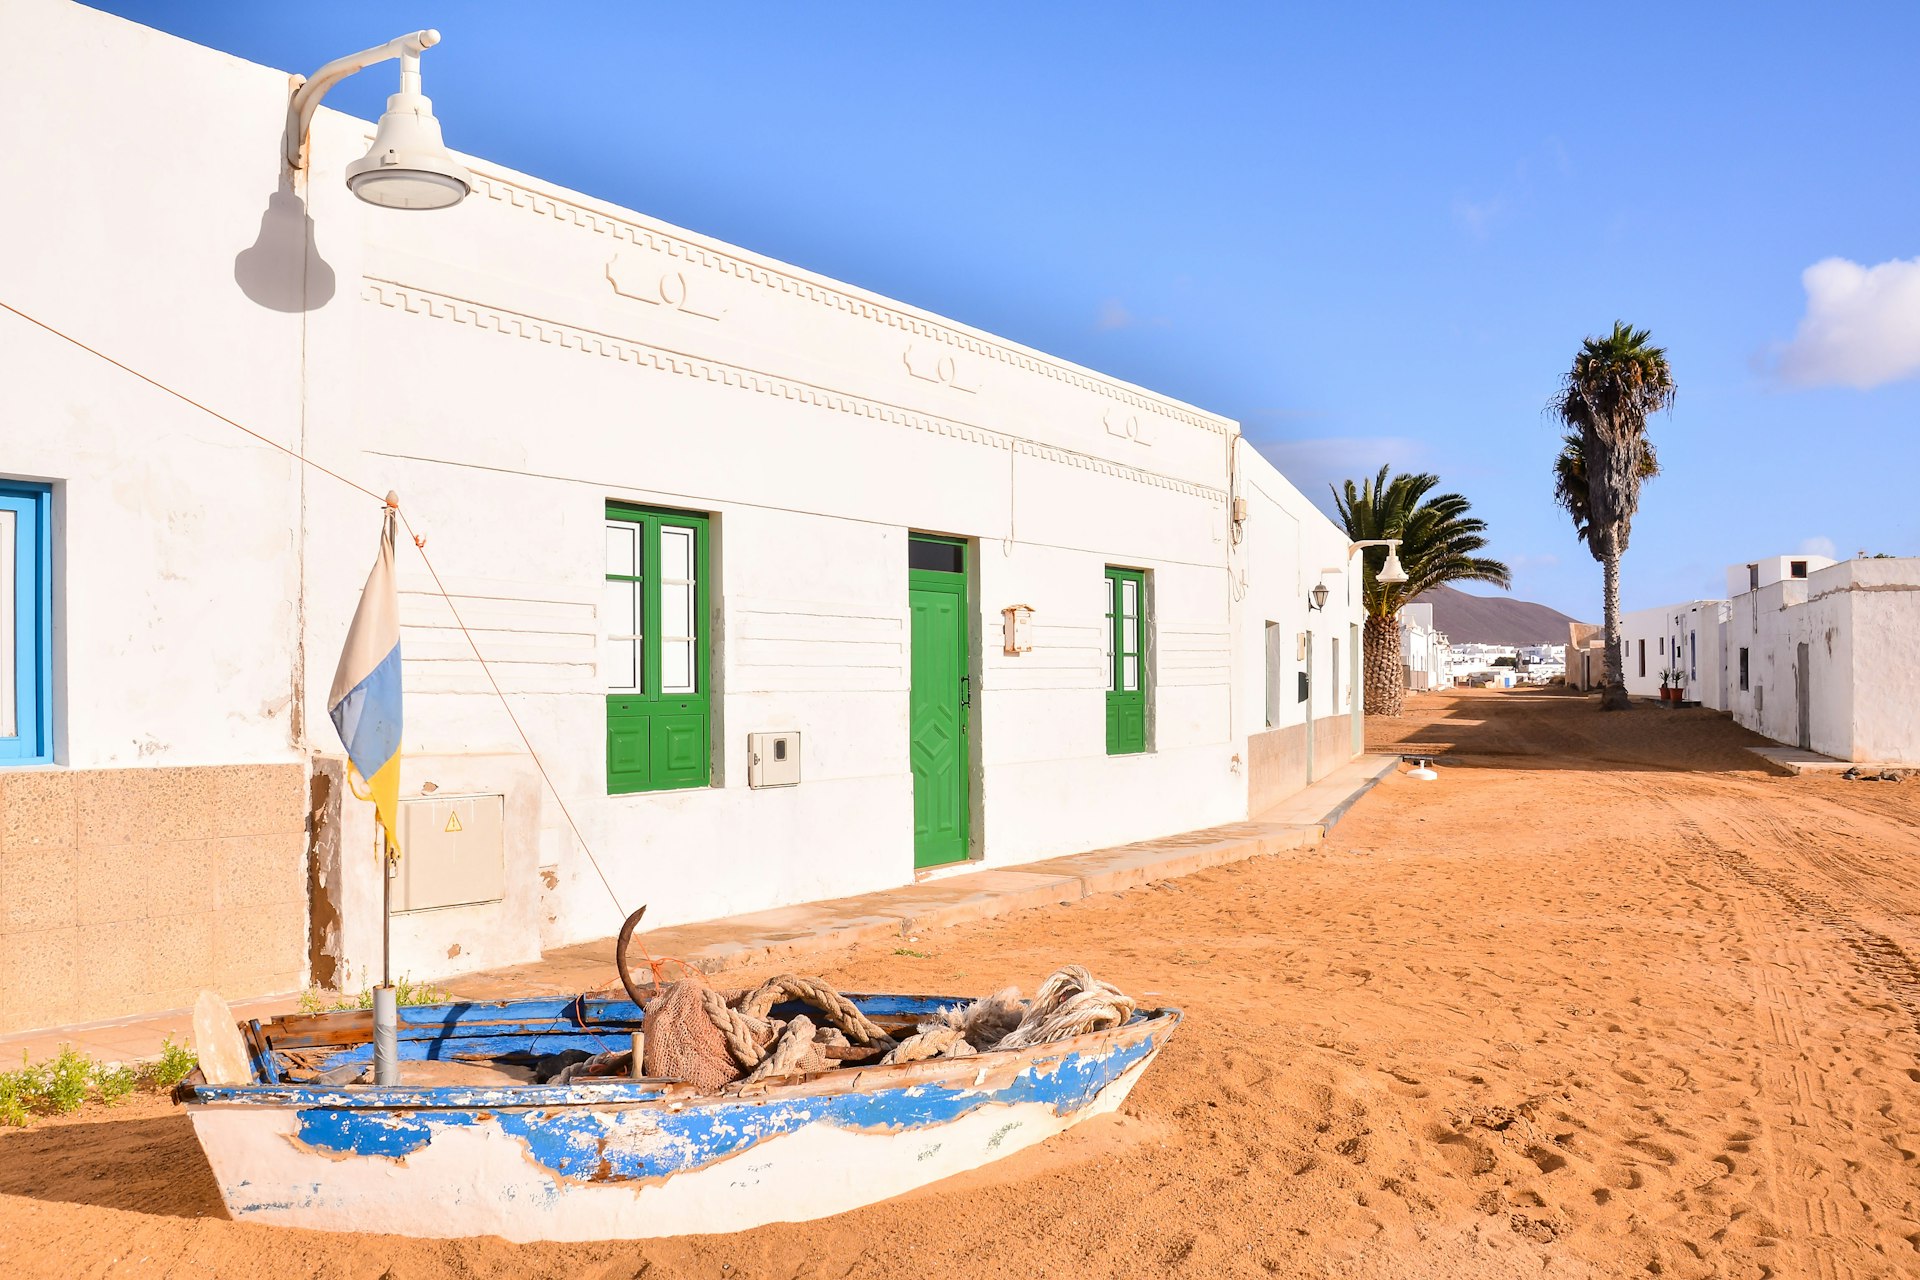 White buildings with sandy streets on the island of La Graciosa